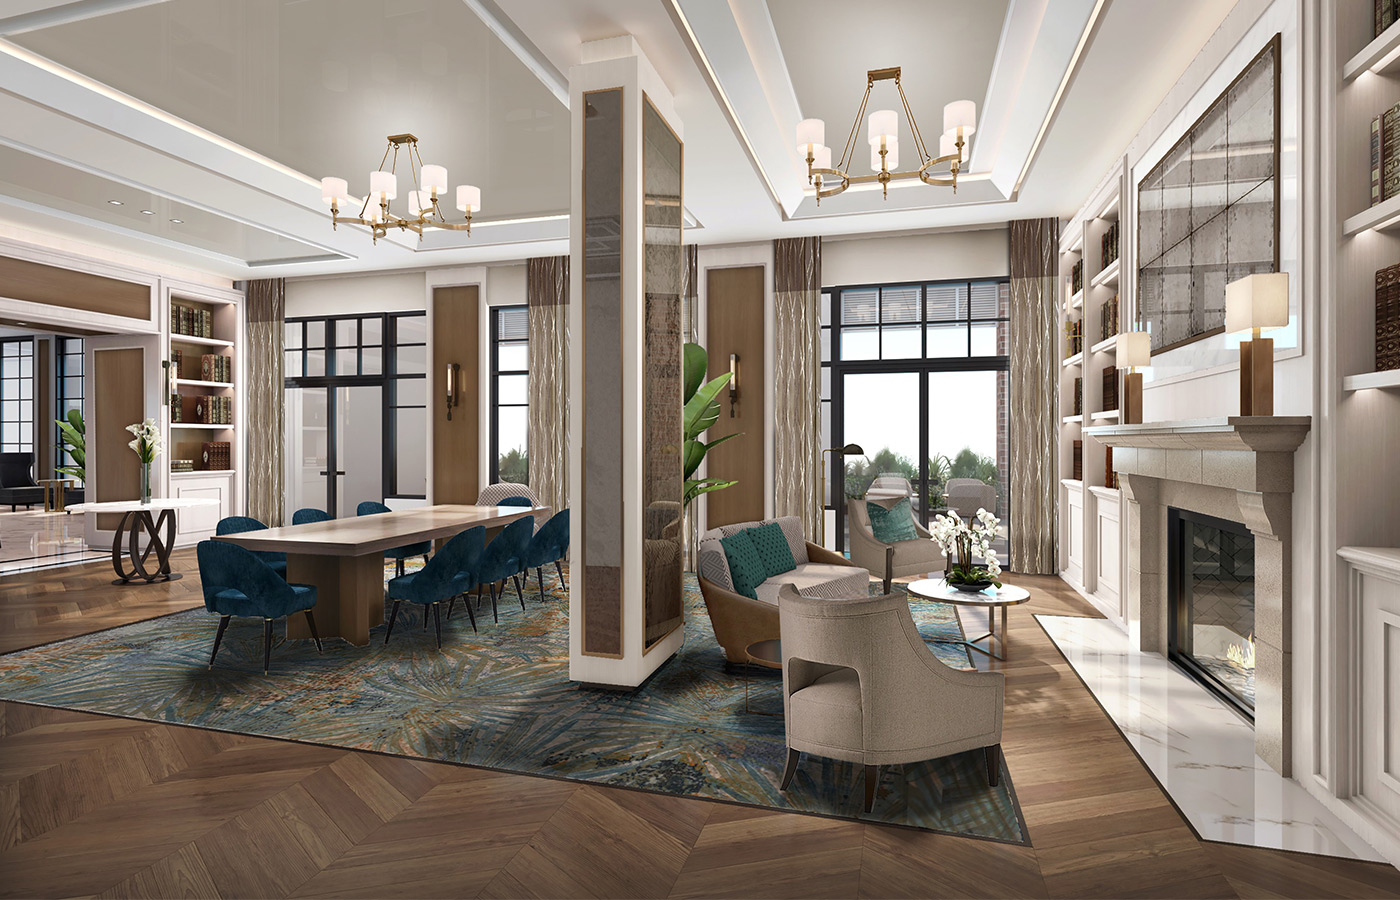 The library at The Watermark at West Palm Beach.